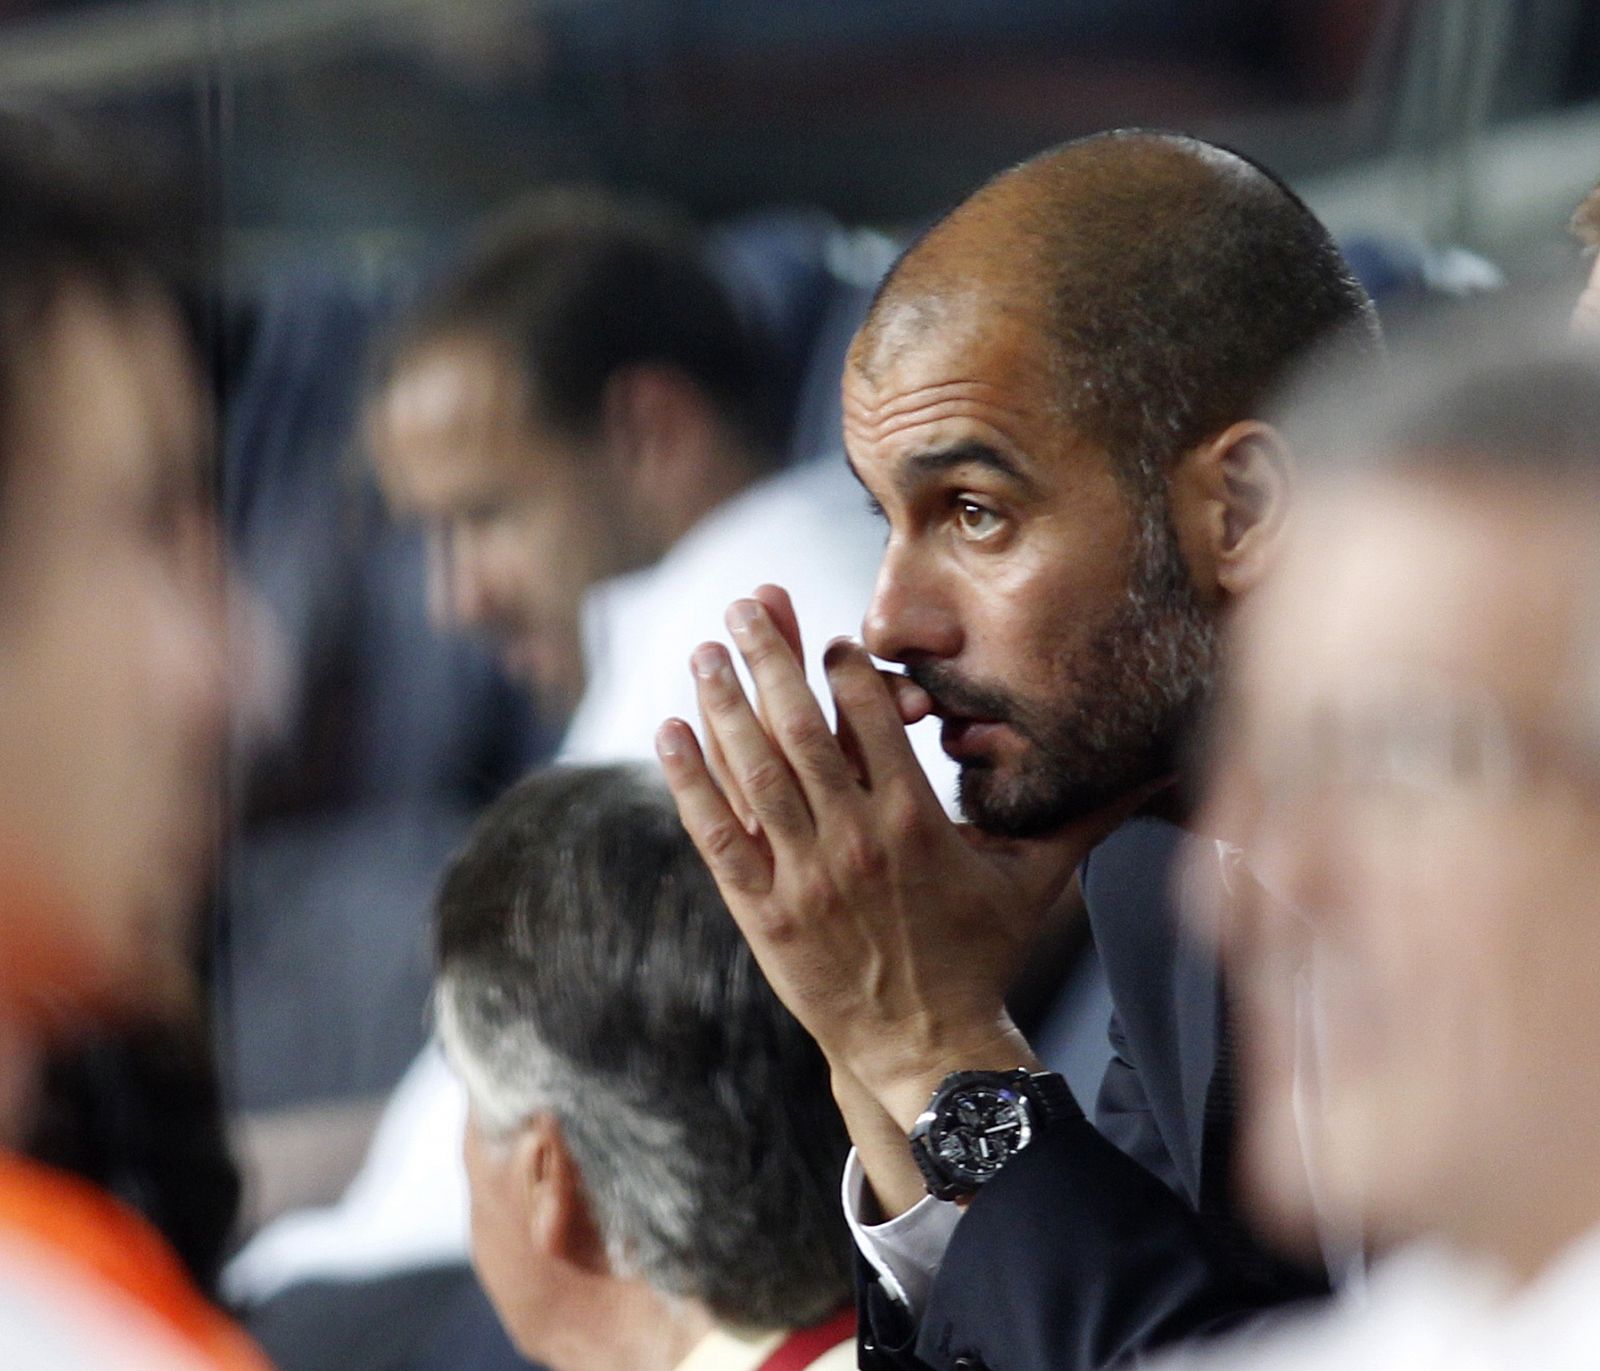 Barcelona's coach Pep Guardiola sits on the bench as he watches Lionel Messi's third goal against Osasuna in Barcelona